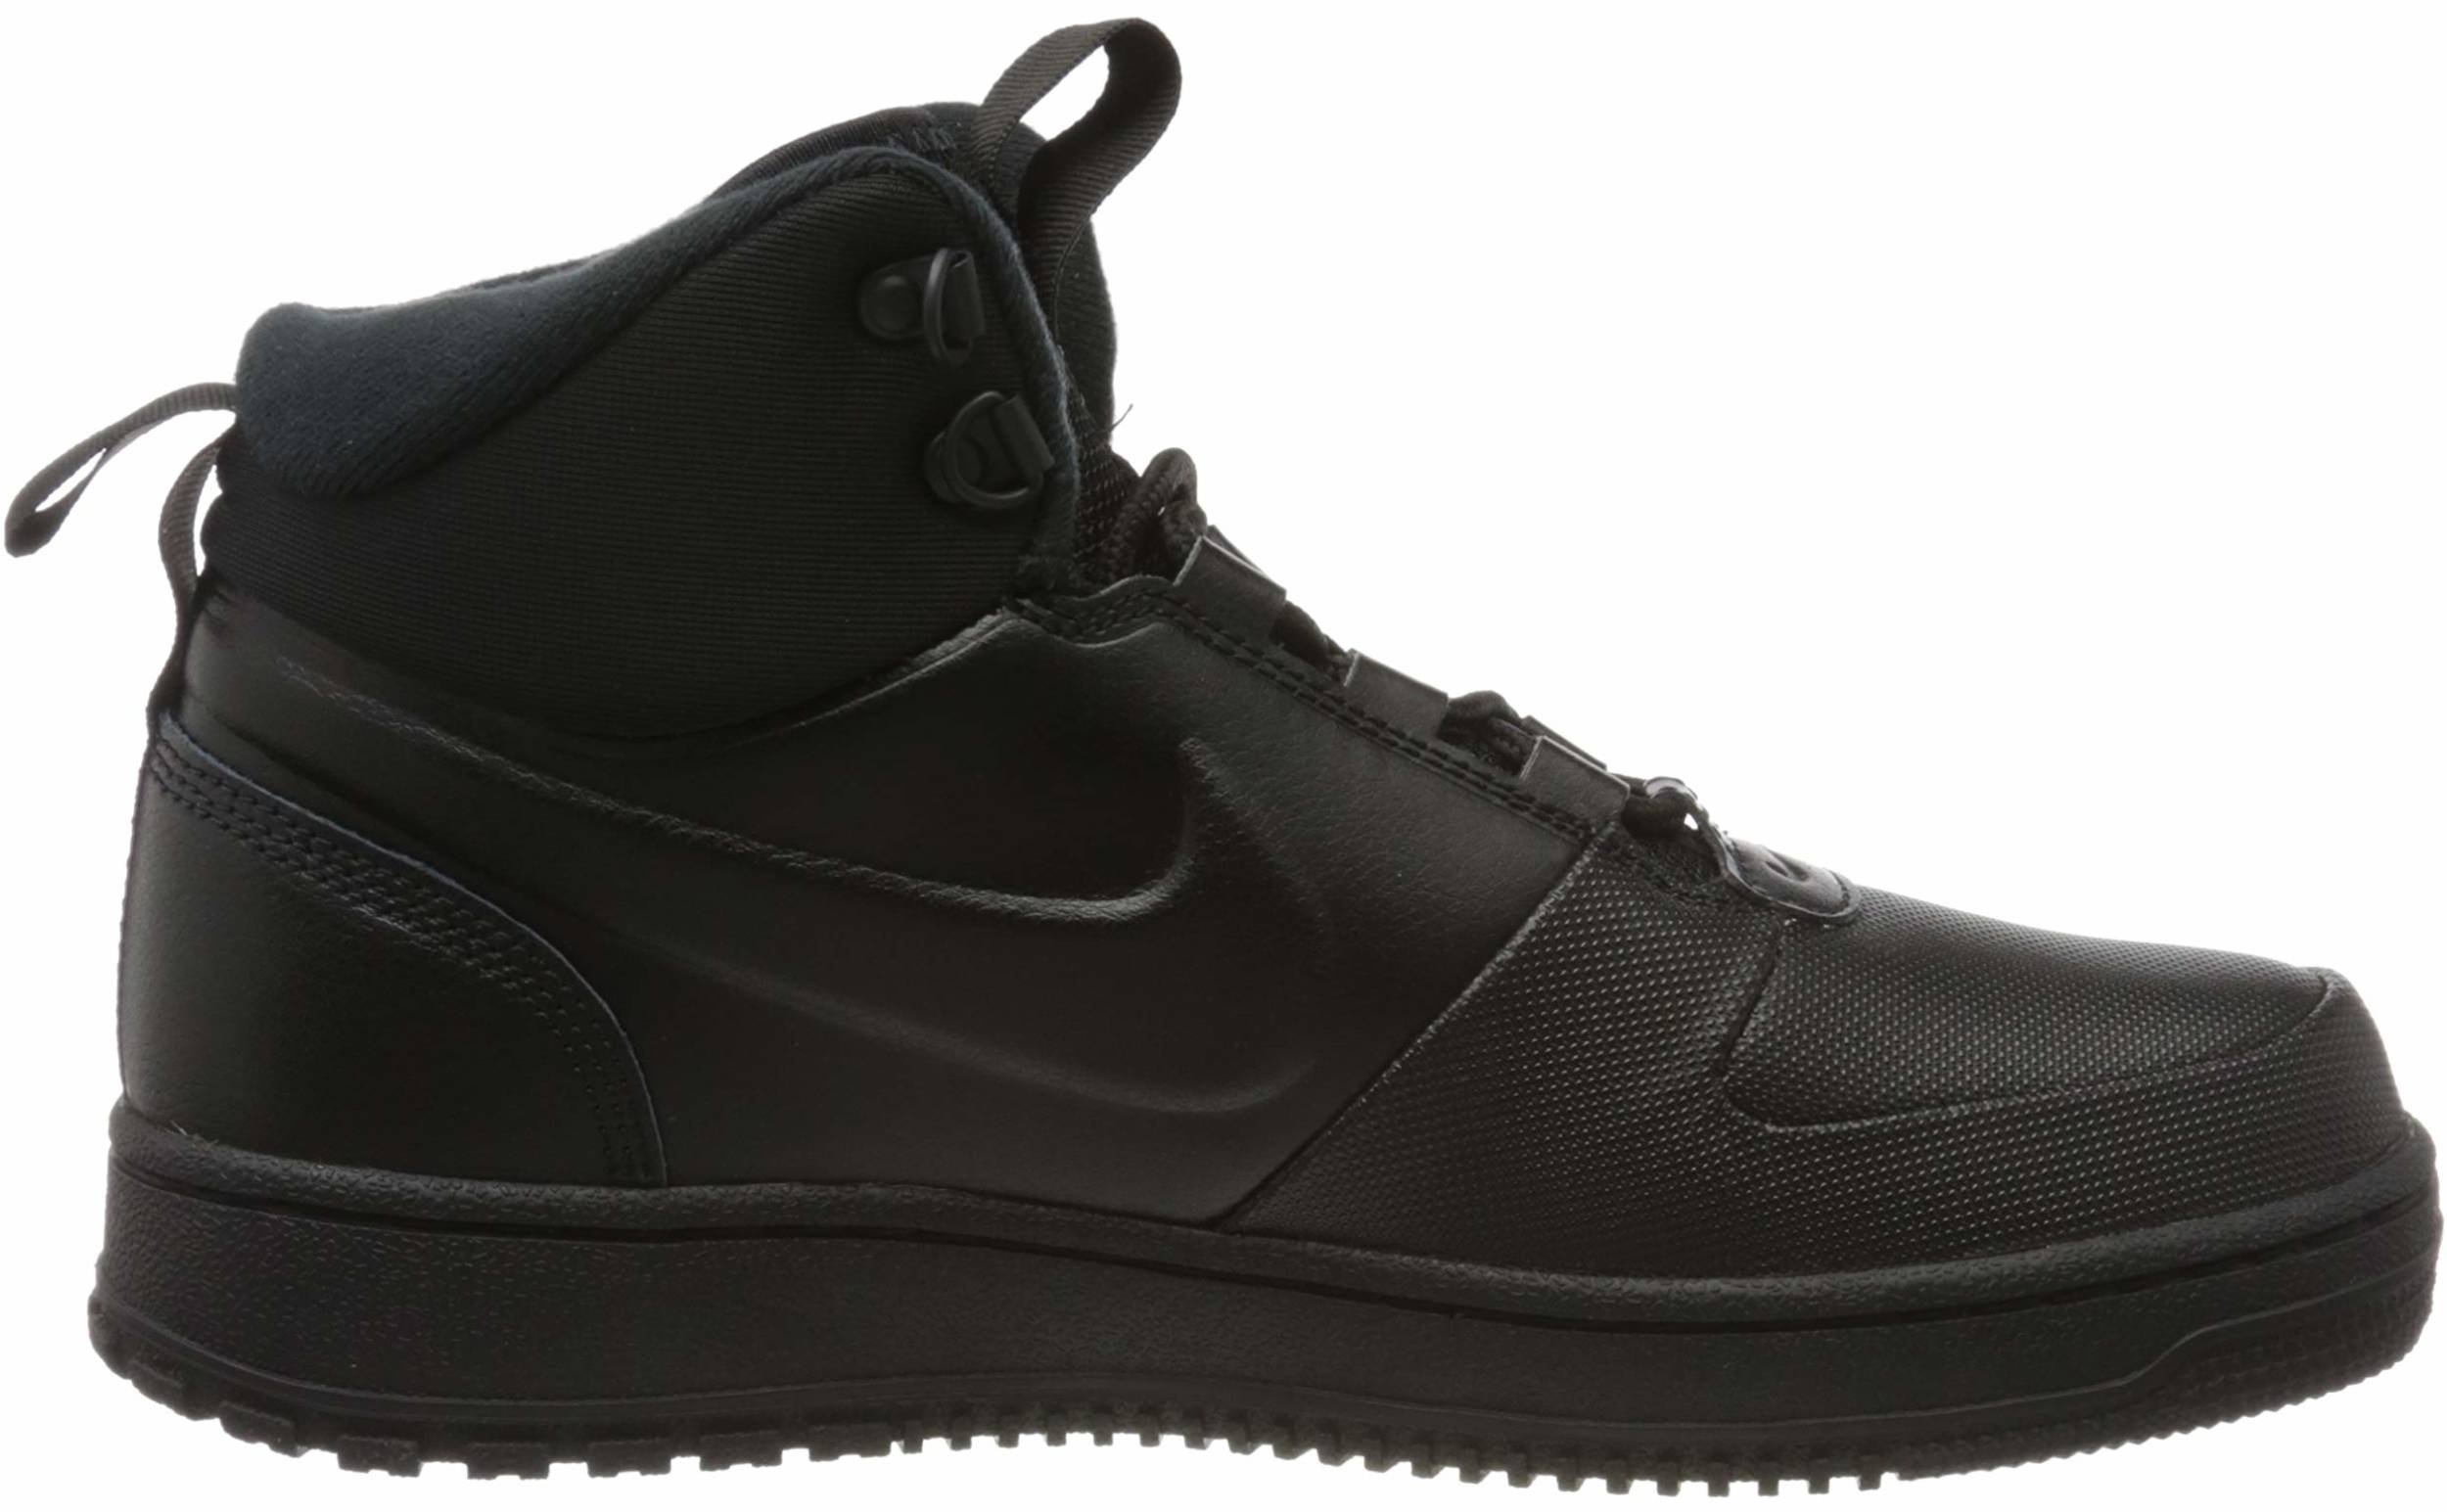 Save 24% on Nike Casual Sneakers (22 